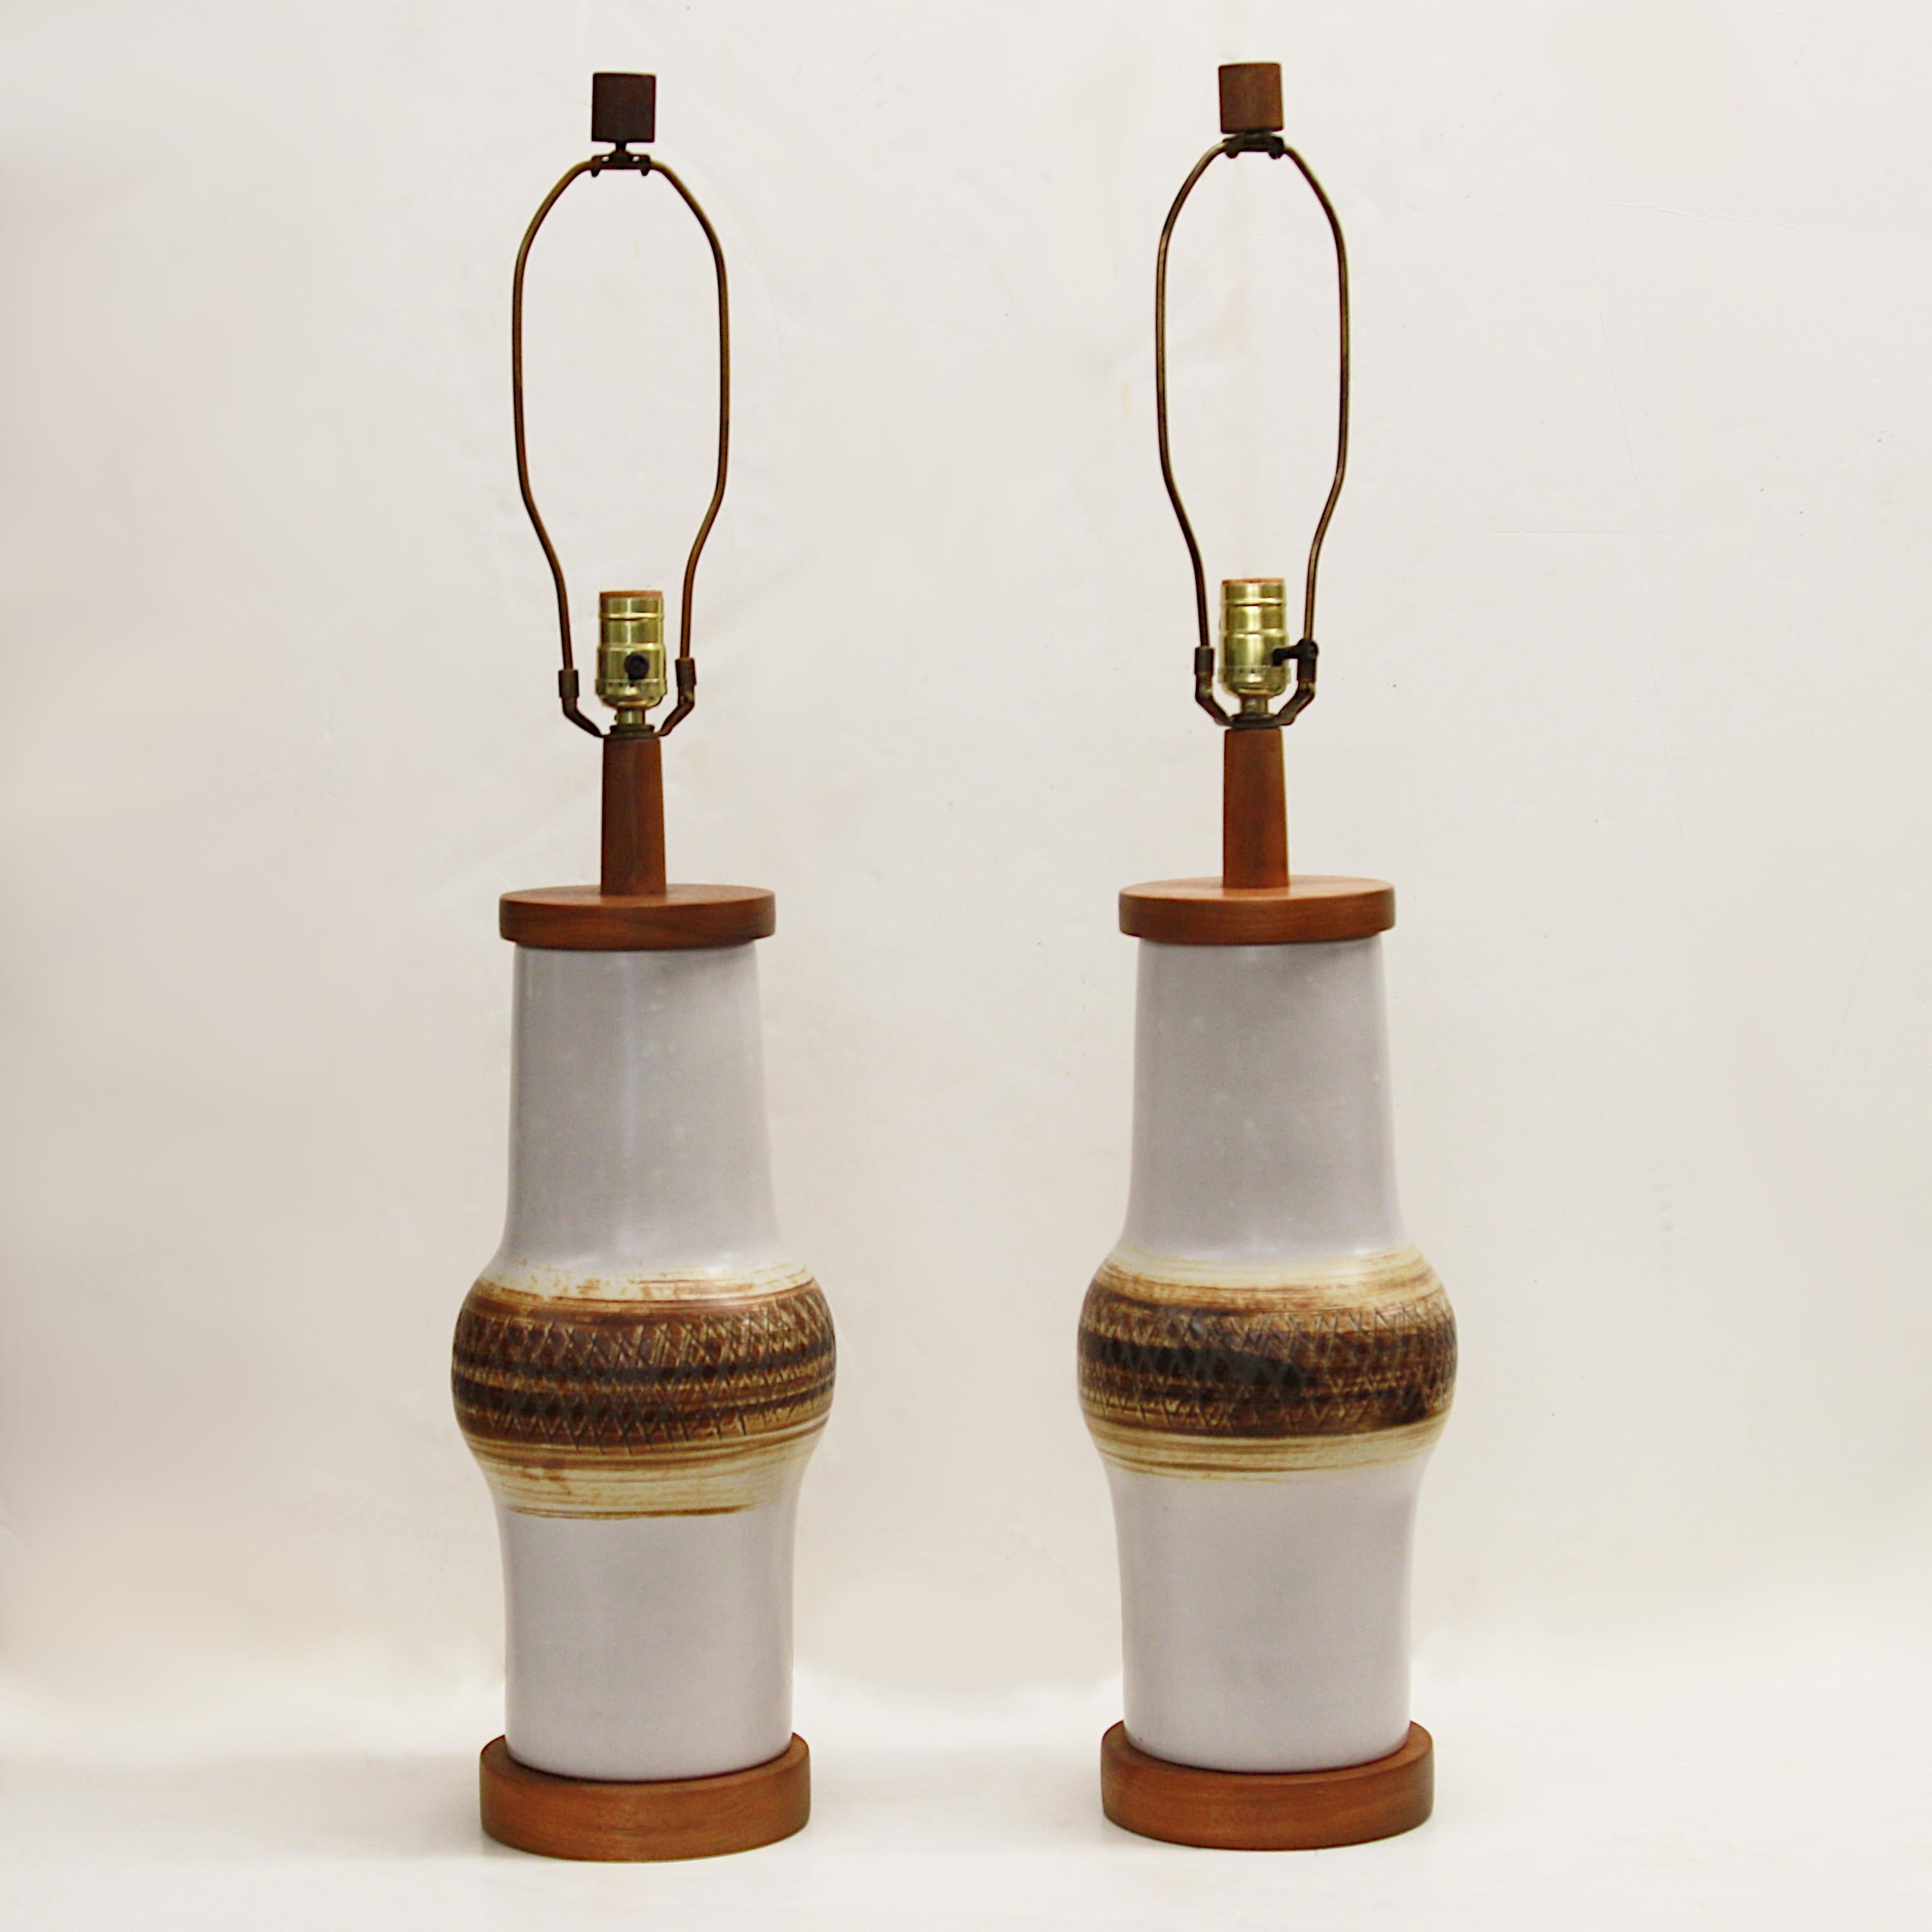 American Pair of Mid-Century Modern White Ceramic Table Lamps by Martz Marshall Studios For Sale